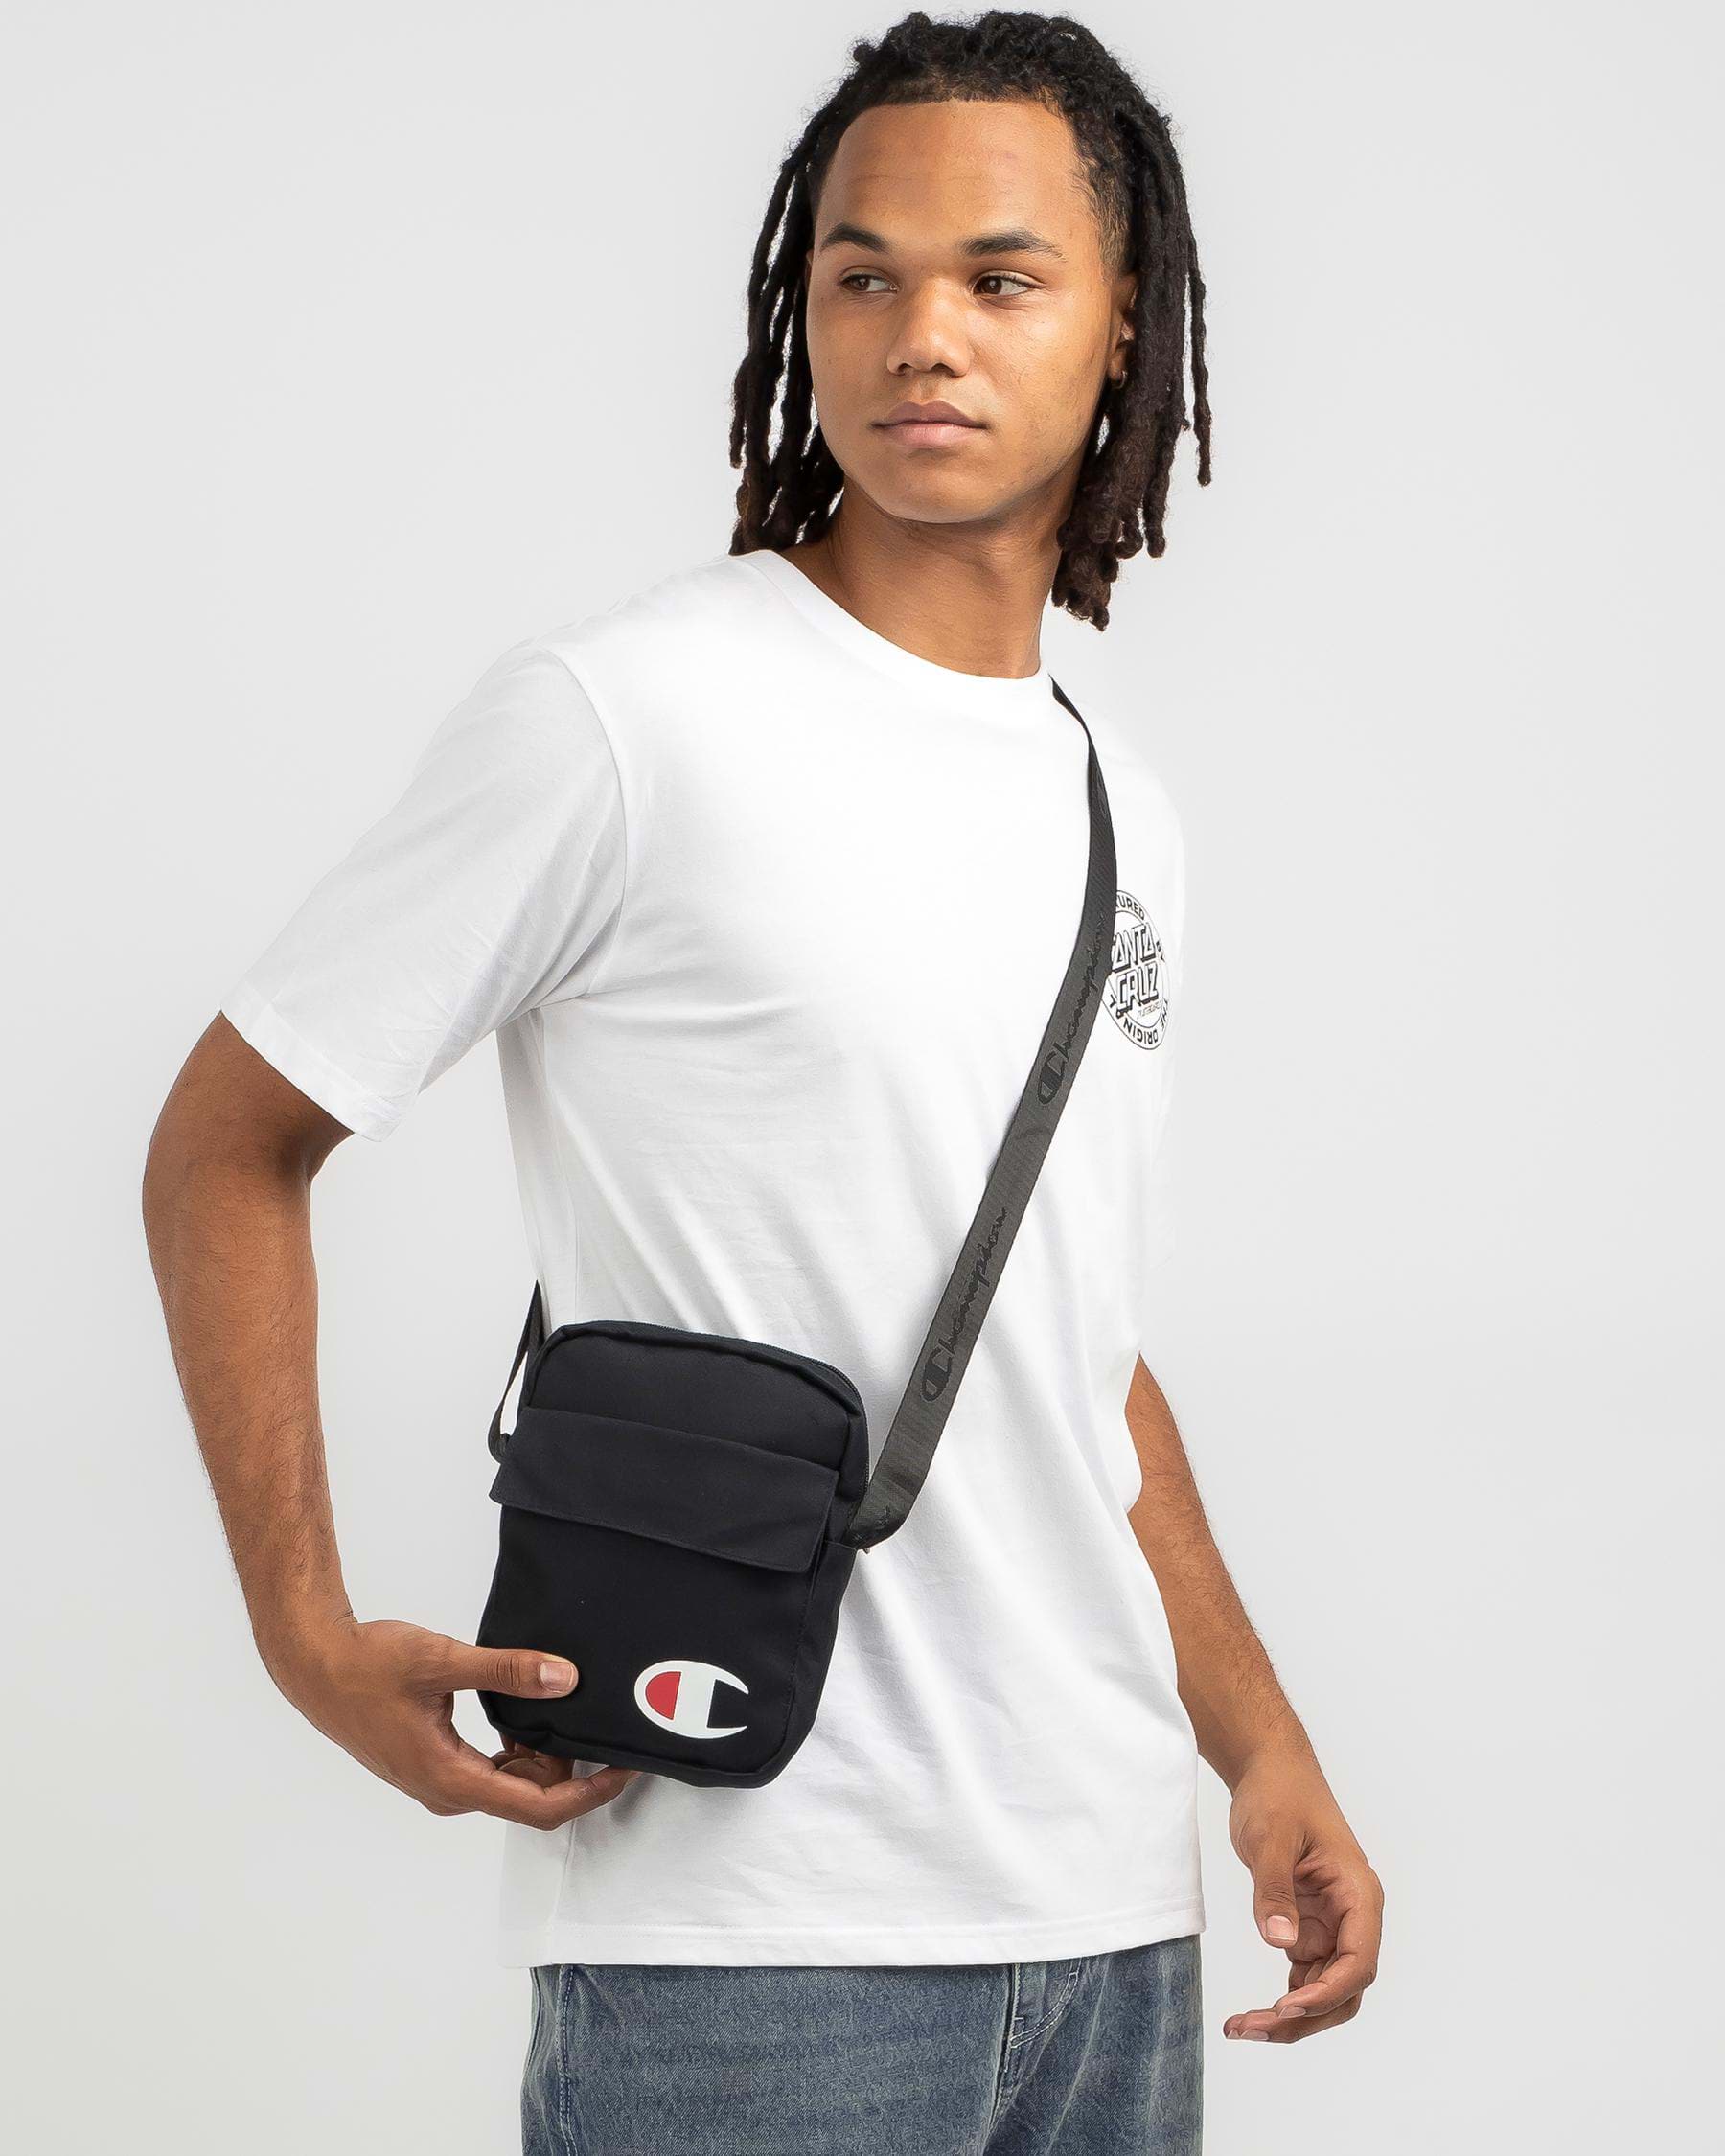 Champion Cross Body In Black Fast Shipping & Easy - City Beach United States